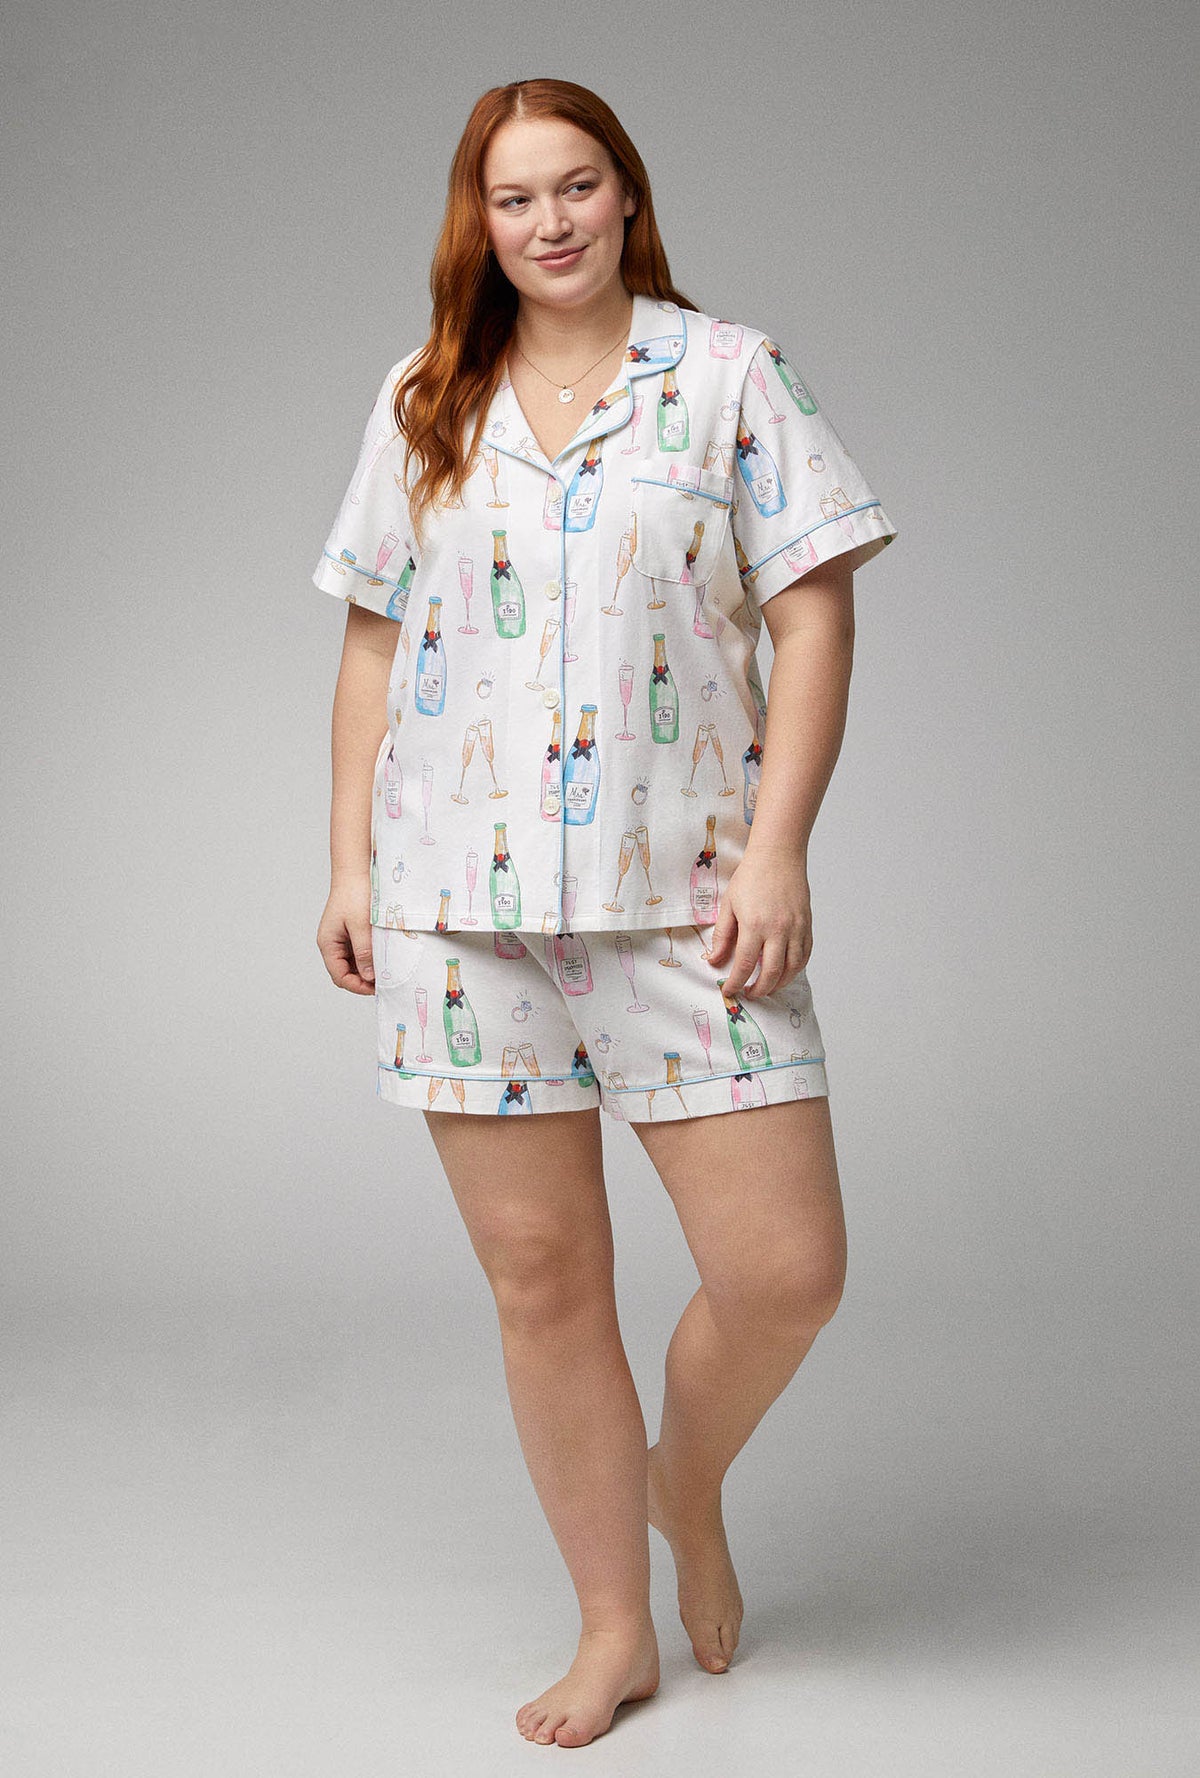 A lady wearing Short Sleeve Classic Shorty Stretch Jersey plus size PJ Set with Champagne Wedding print